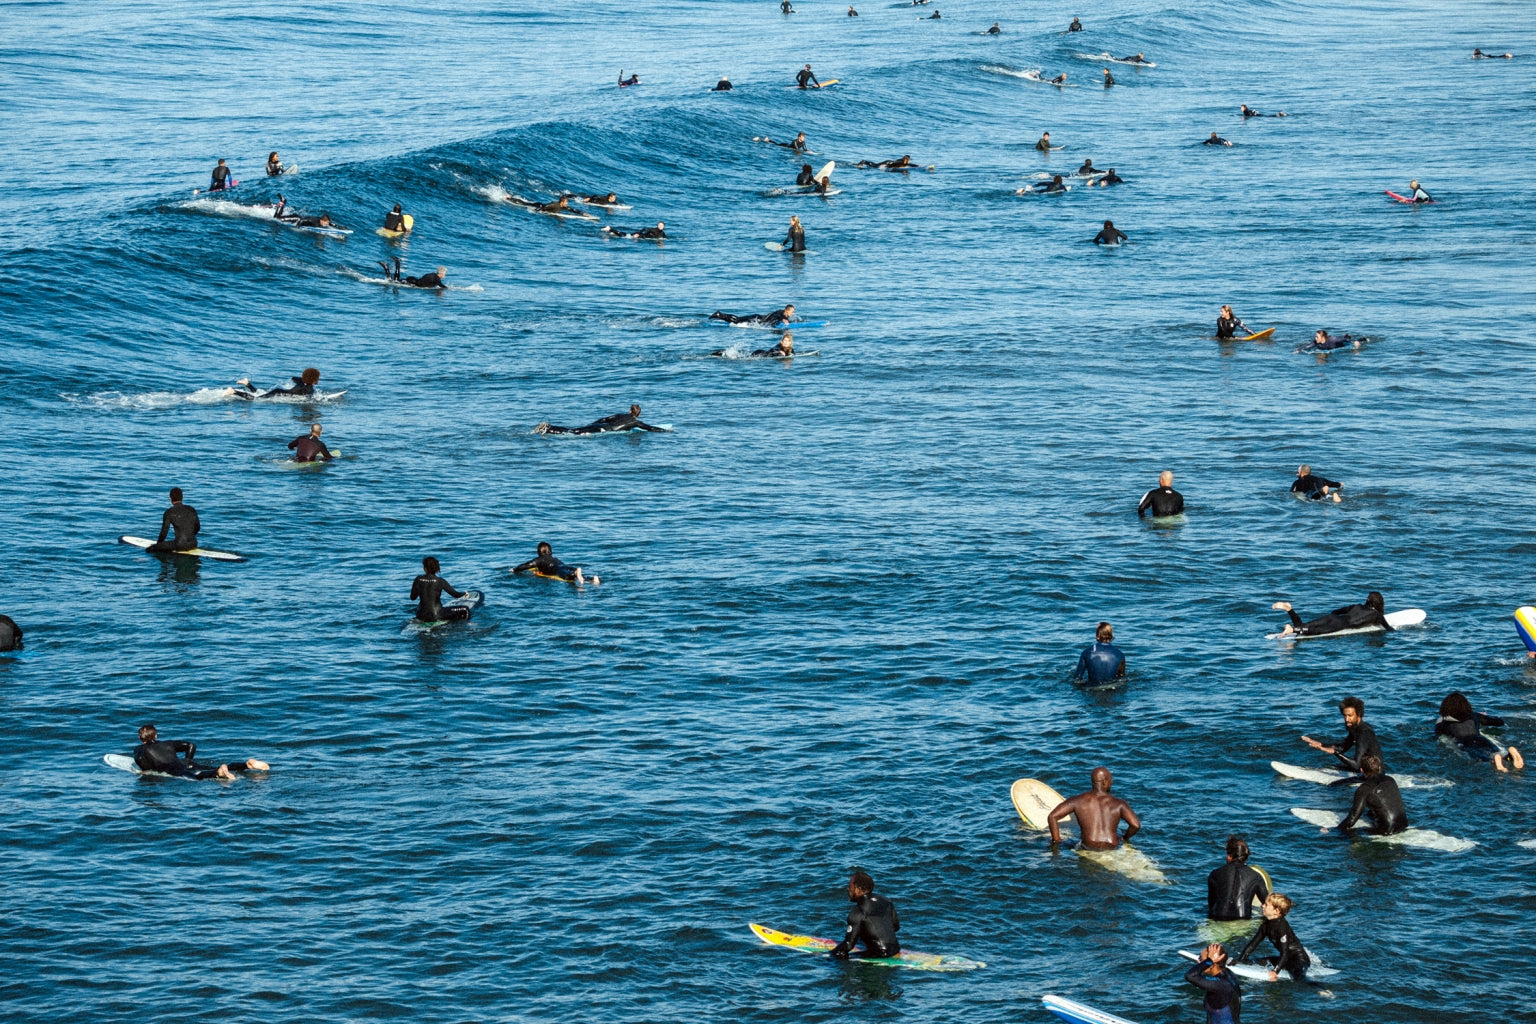 Every race and identity are present in the city of Los Angeles – its beaches and surf lineups should be no different.